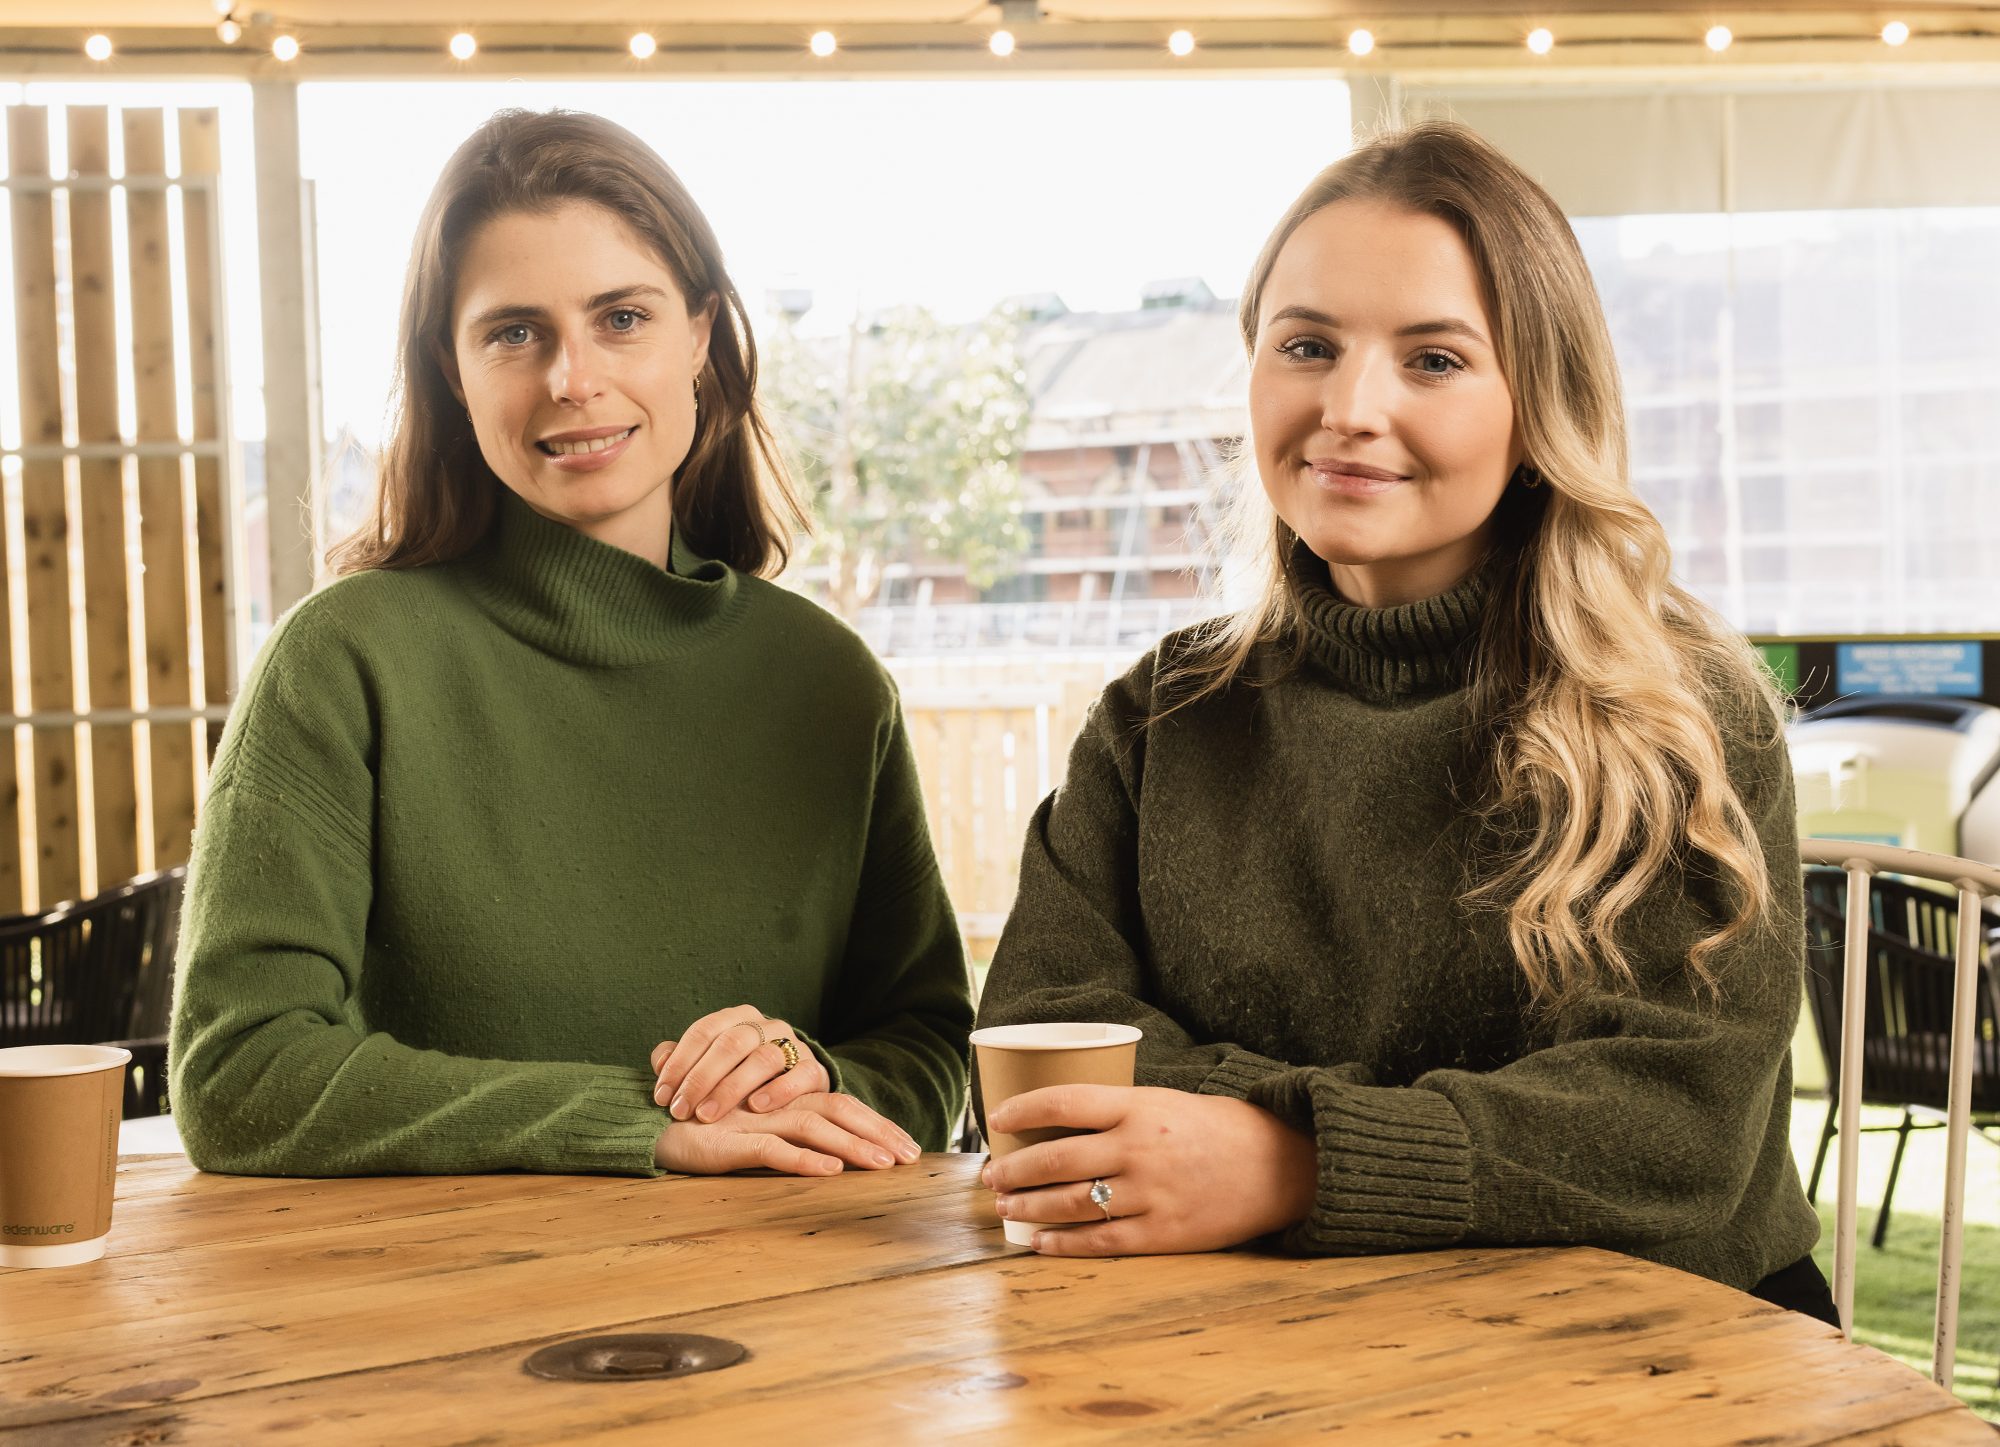 Co-Founders: The entrepreneurial journey of Northern Ireland’s female founders